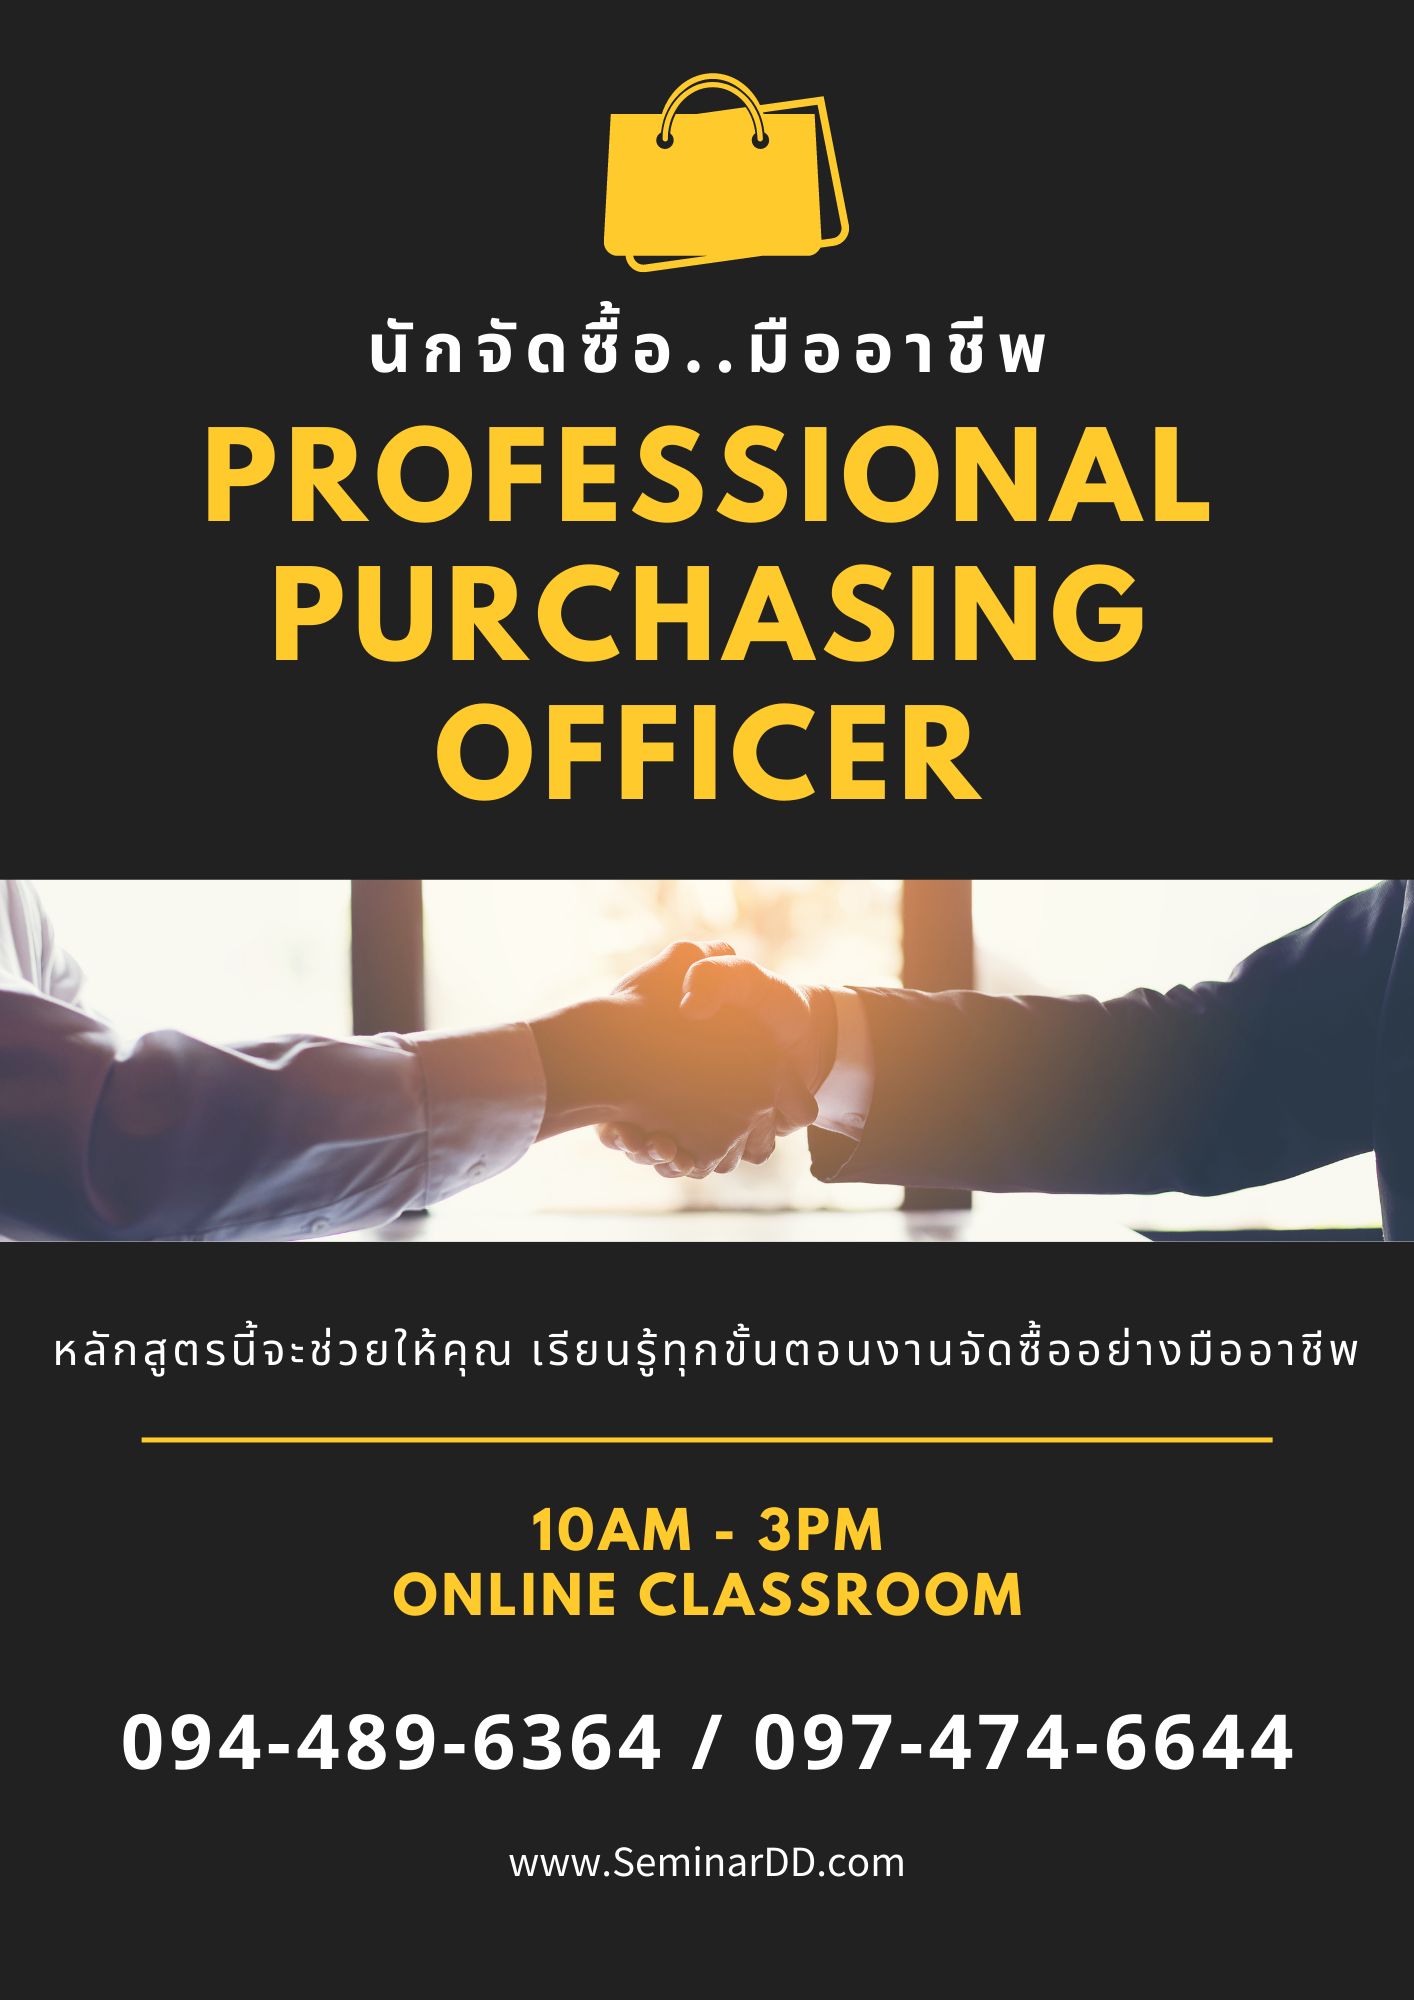 Online by Zoom หลักสูตร หลักสูตร นักจัดซื้อมืออาชีพ  (Professional Purchasing Officer)